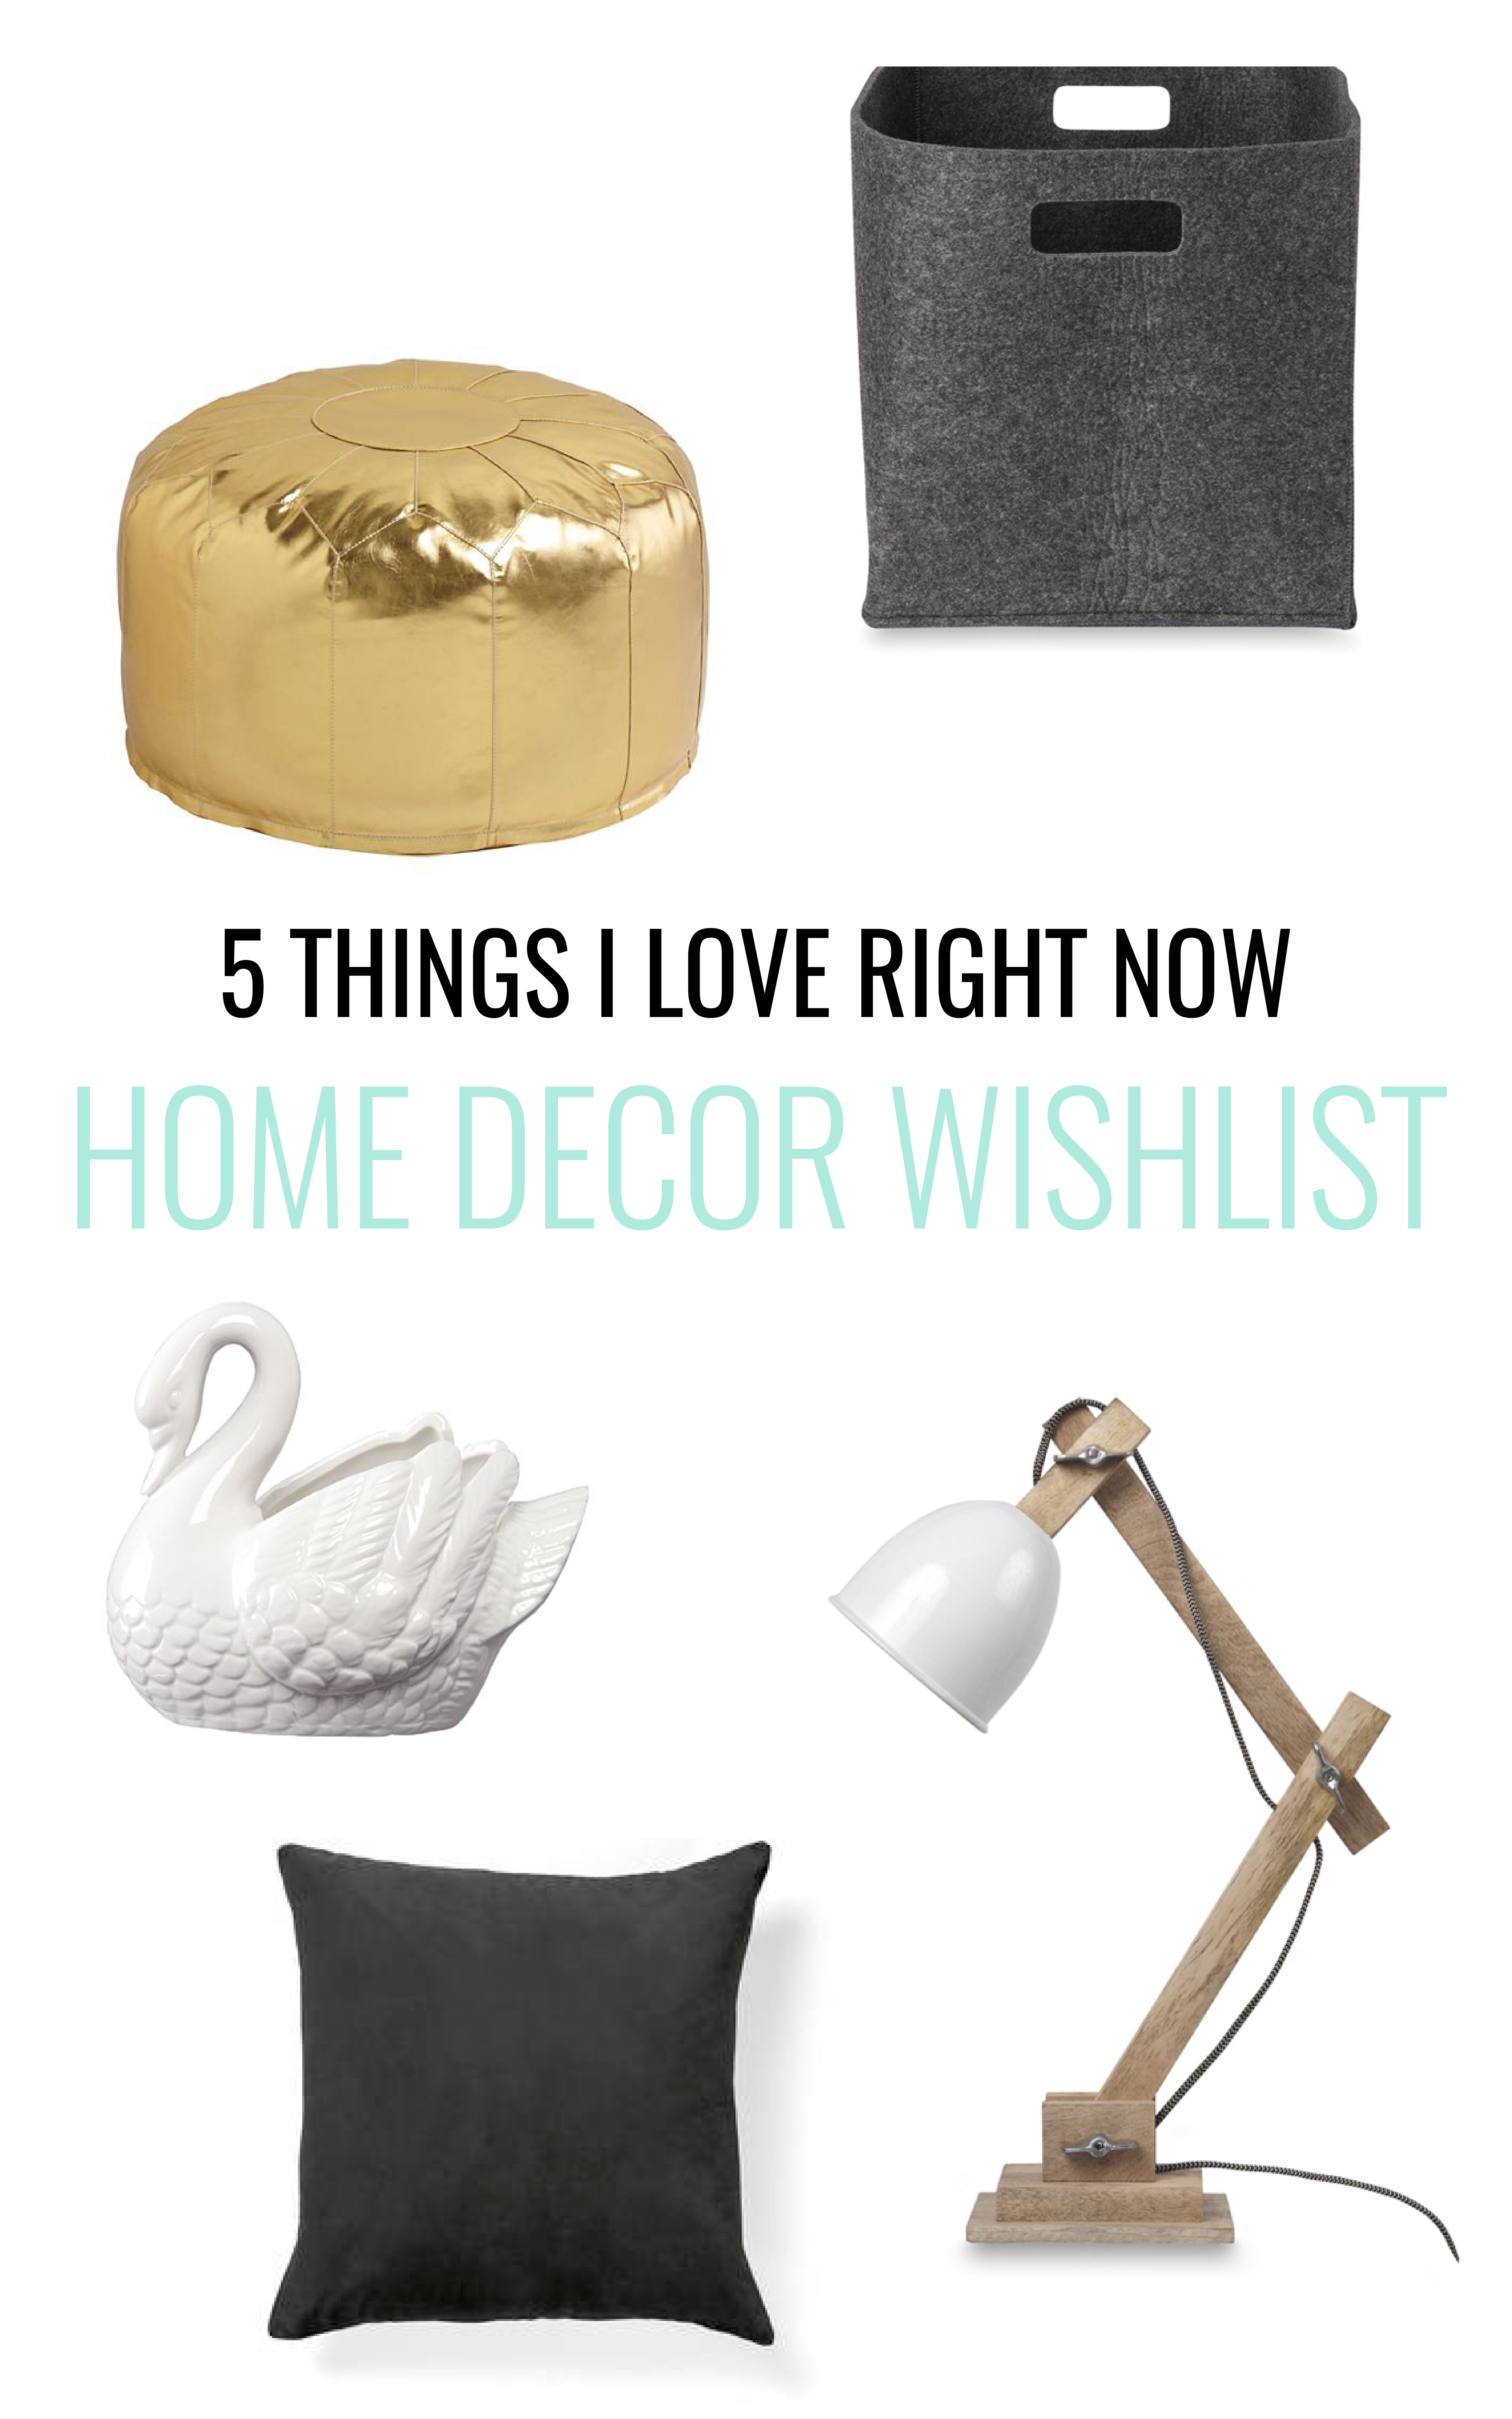 See some of the top things on my home decor wish list right now. Into Scandi style with a bit of country rustic? This is for you!